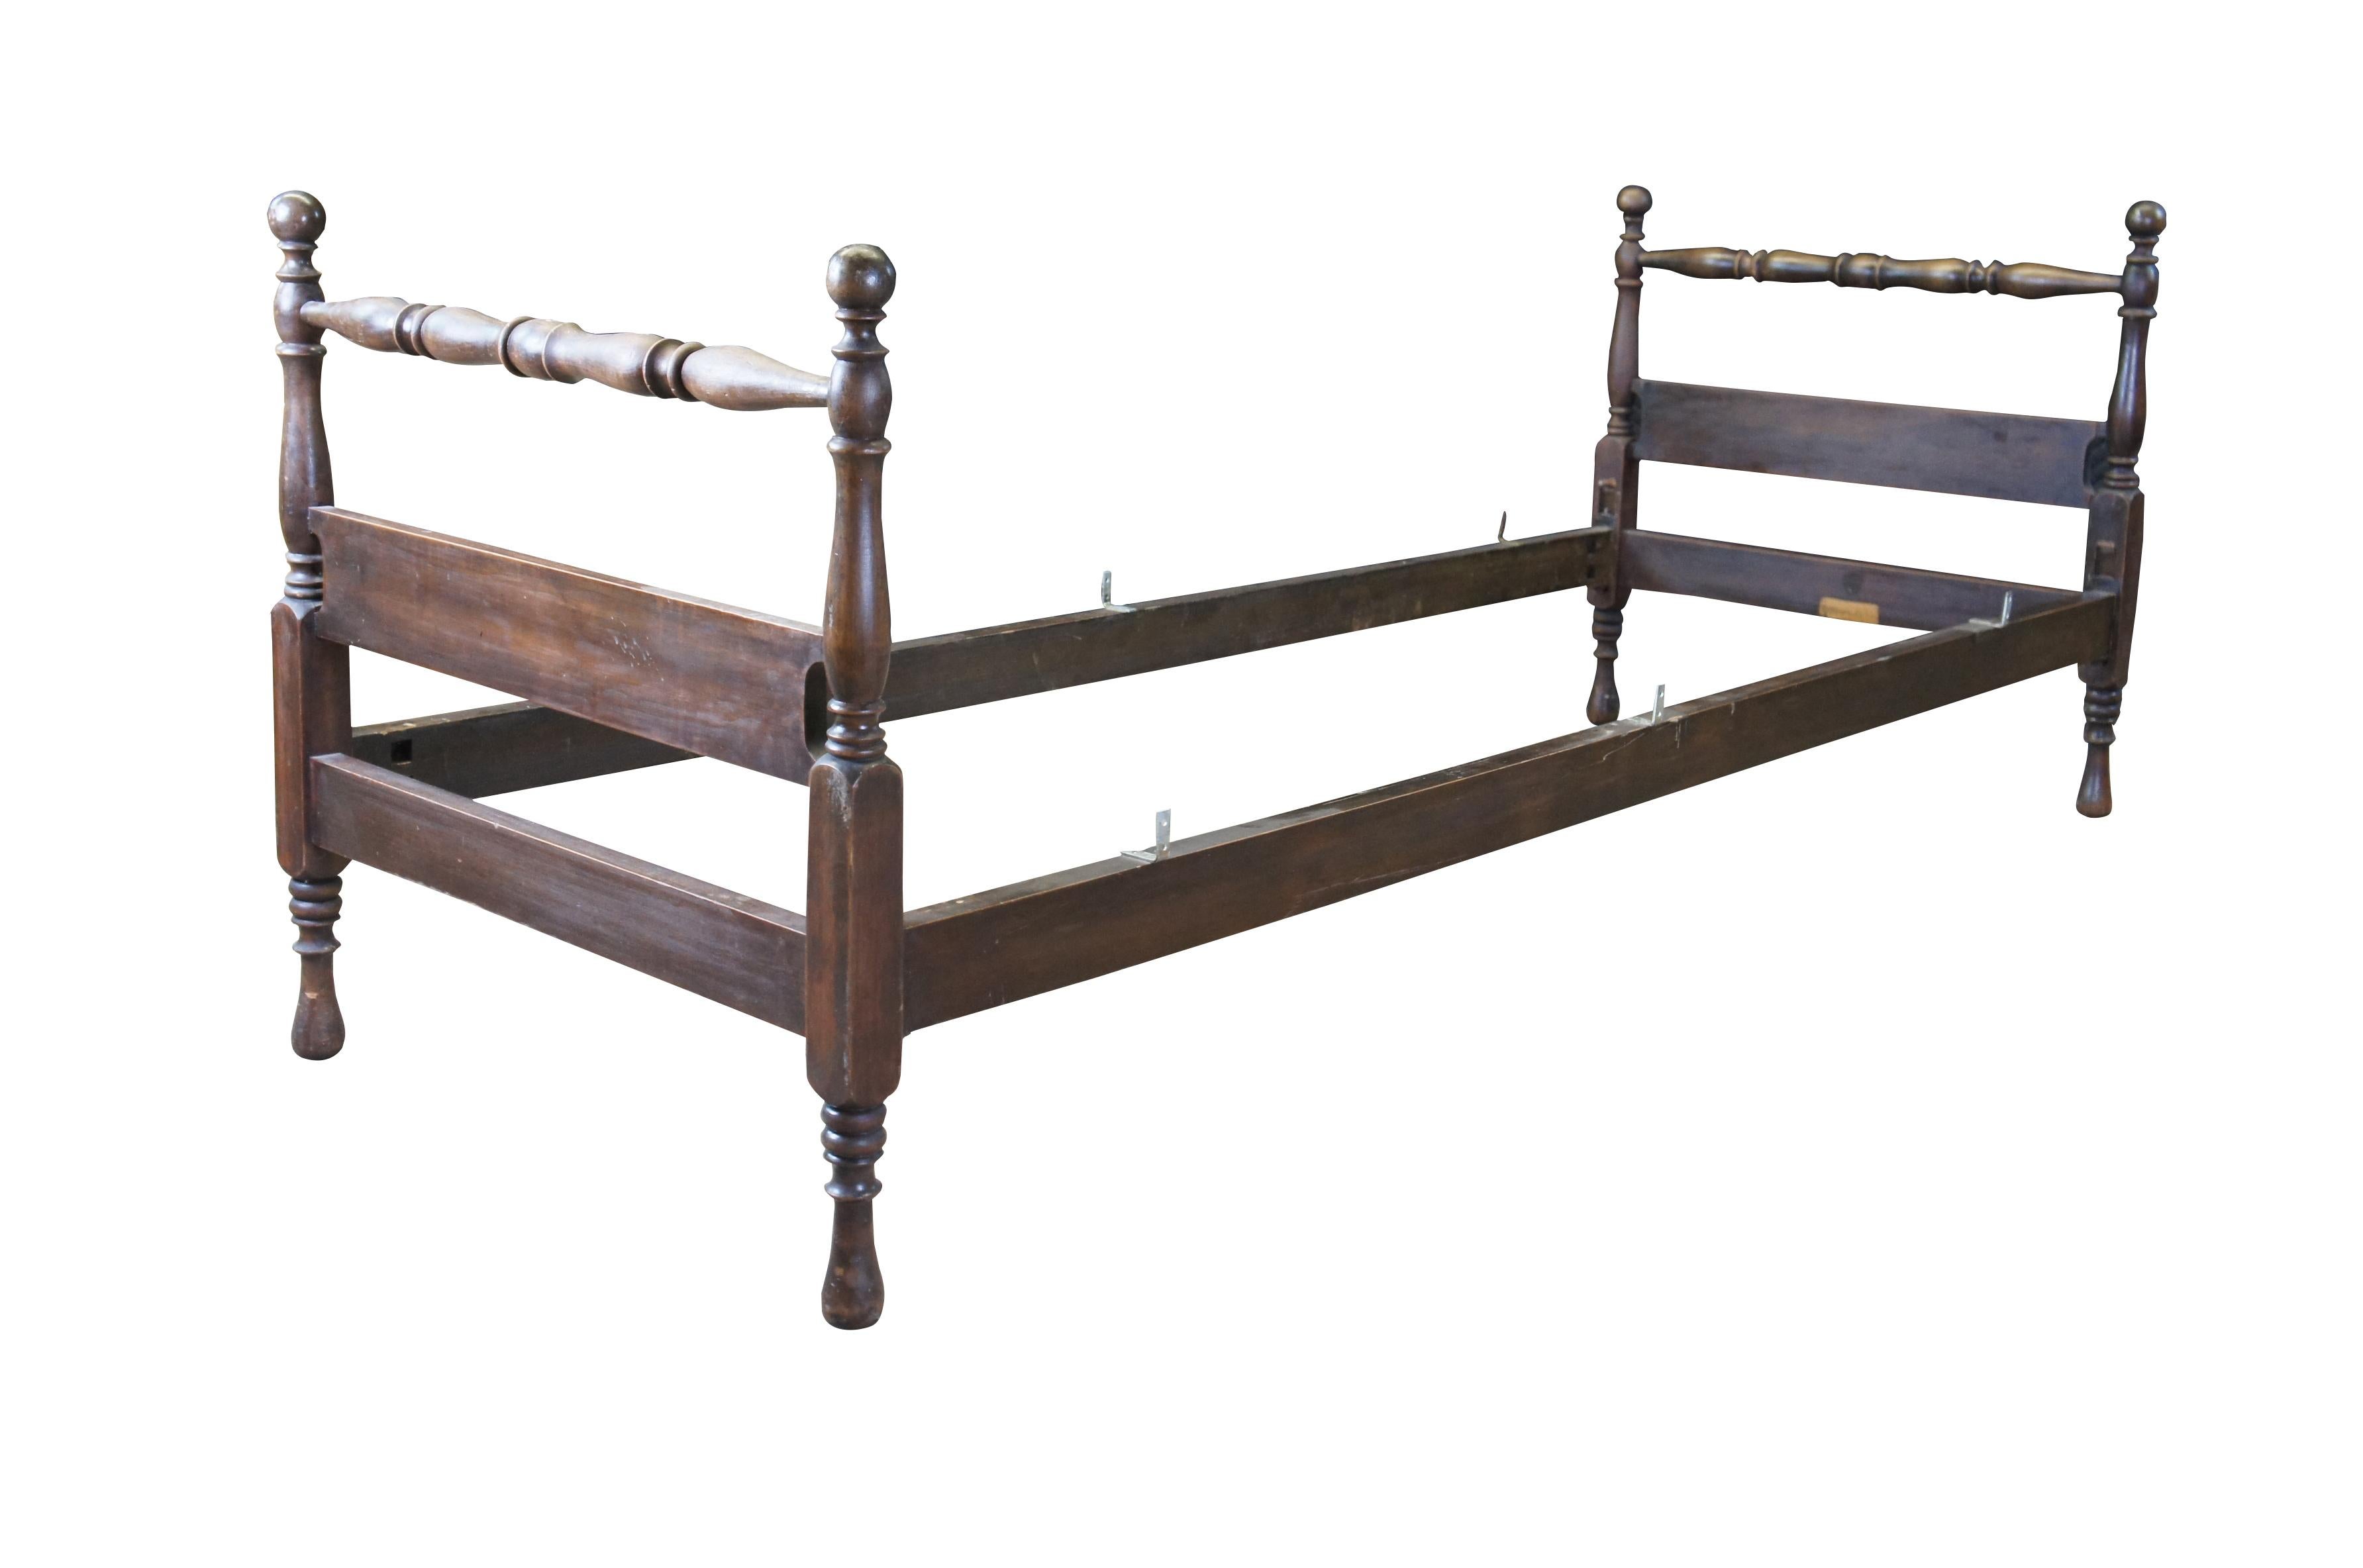 An antique Early American style small single poster bed.  Features turned posts and toupie feet.

Dimensions:
30